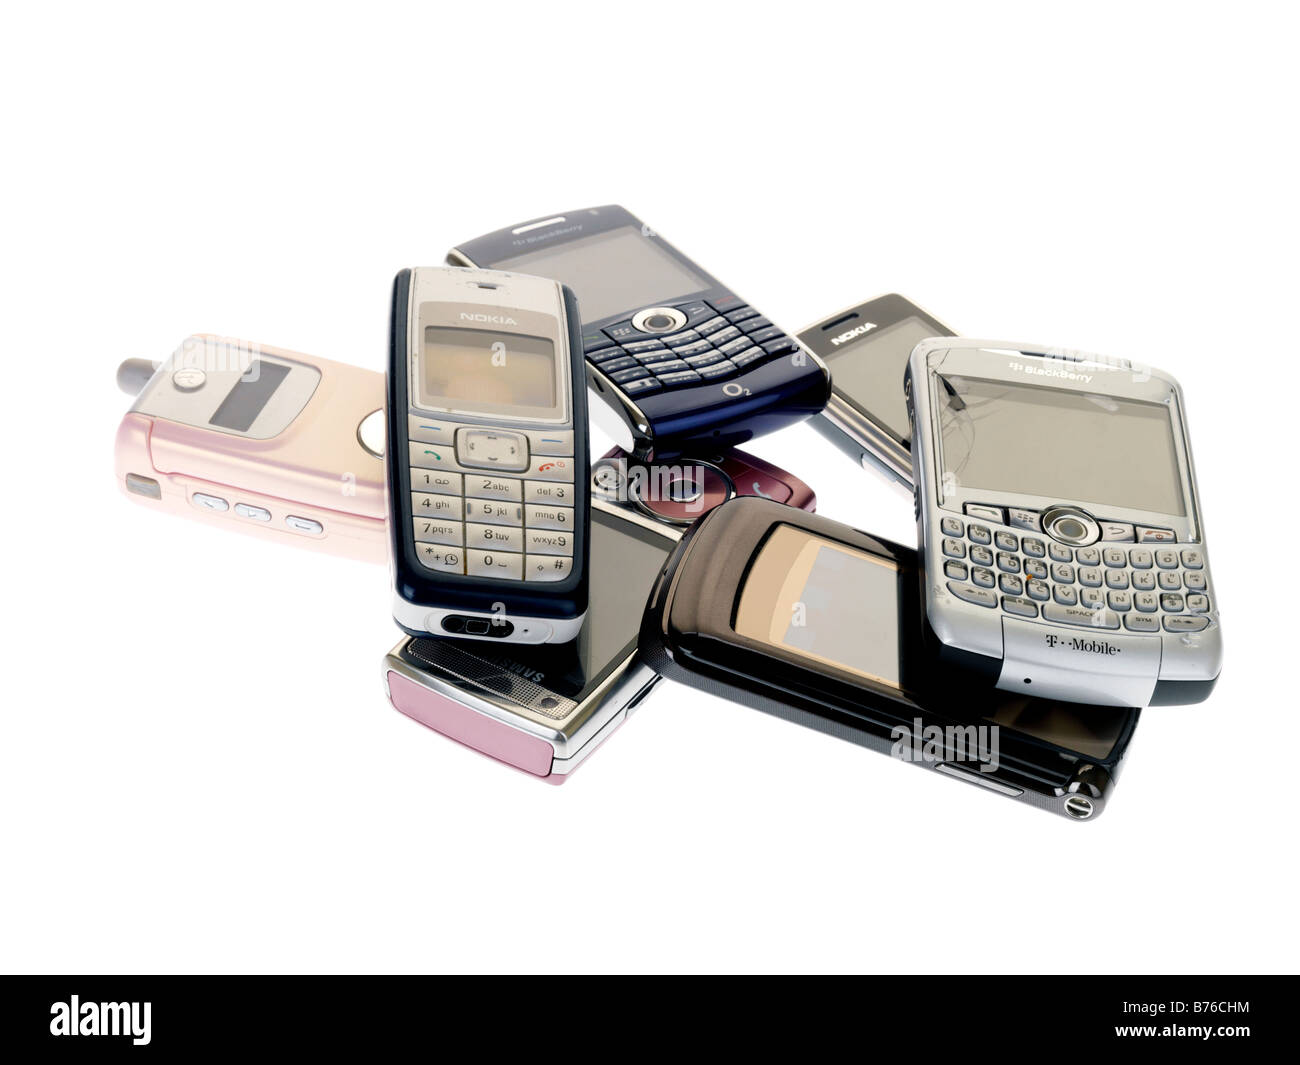 Collection or Pile of Old Yesterdays Technology Mobile Cell Phones Out Of Date No longer Used Or Wanted As Communication Technology Advances Stock Photo